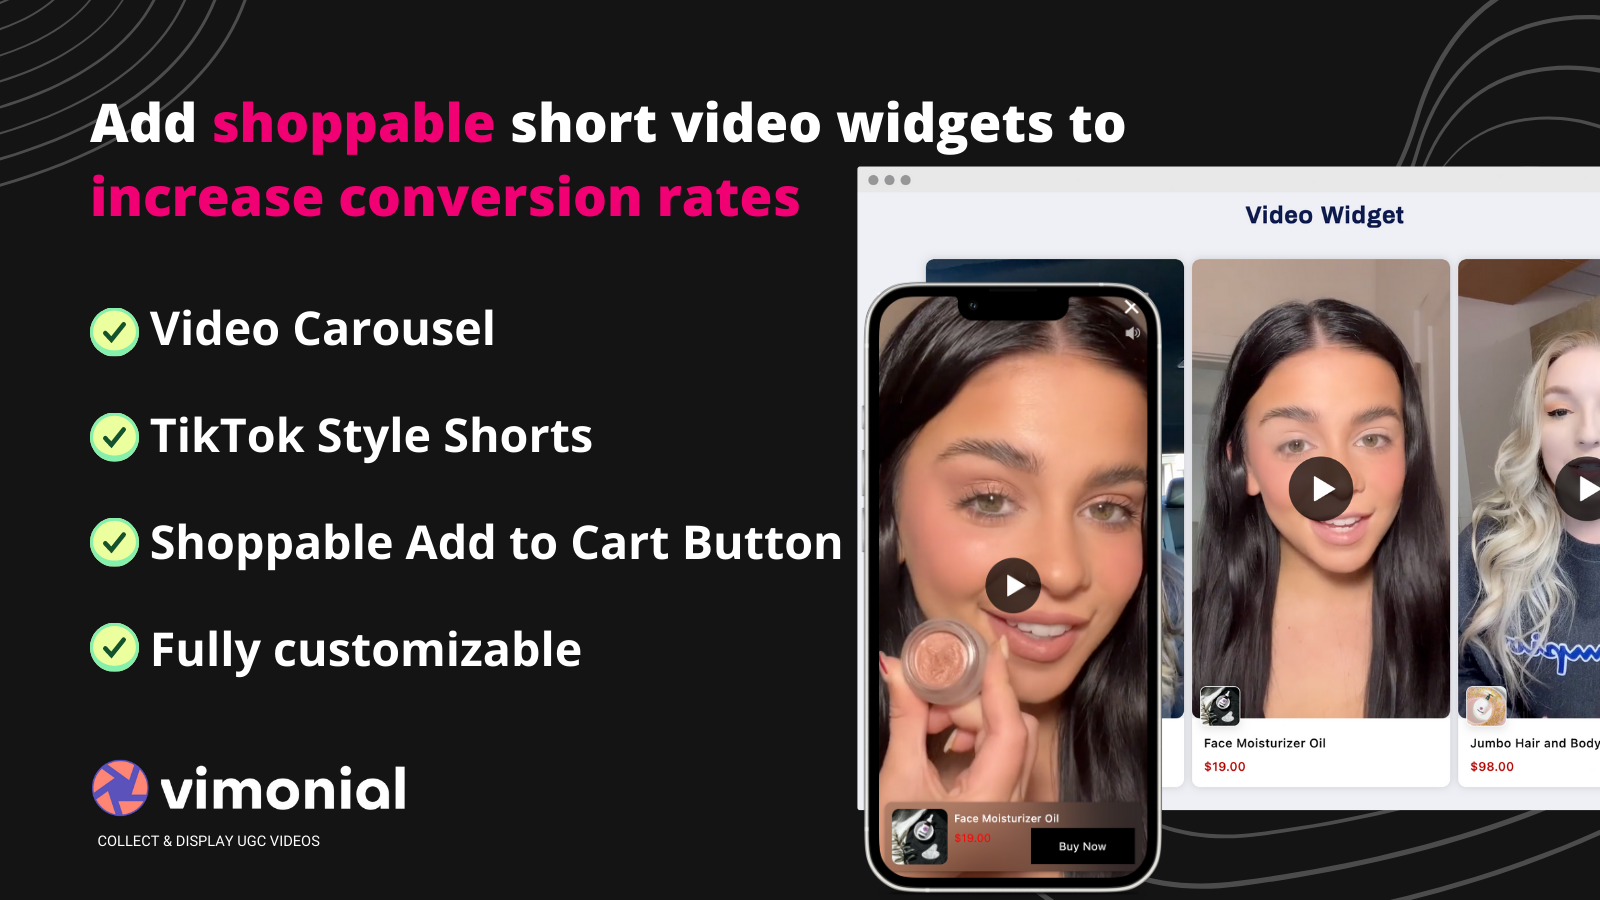 Add shoppable short videos to increase conversion rates